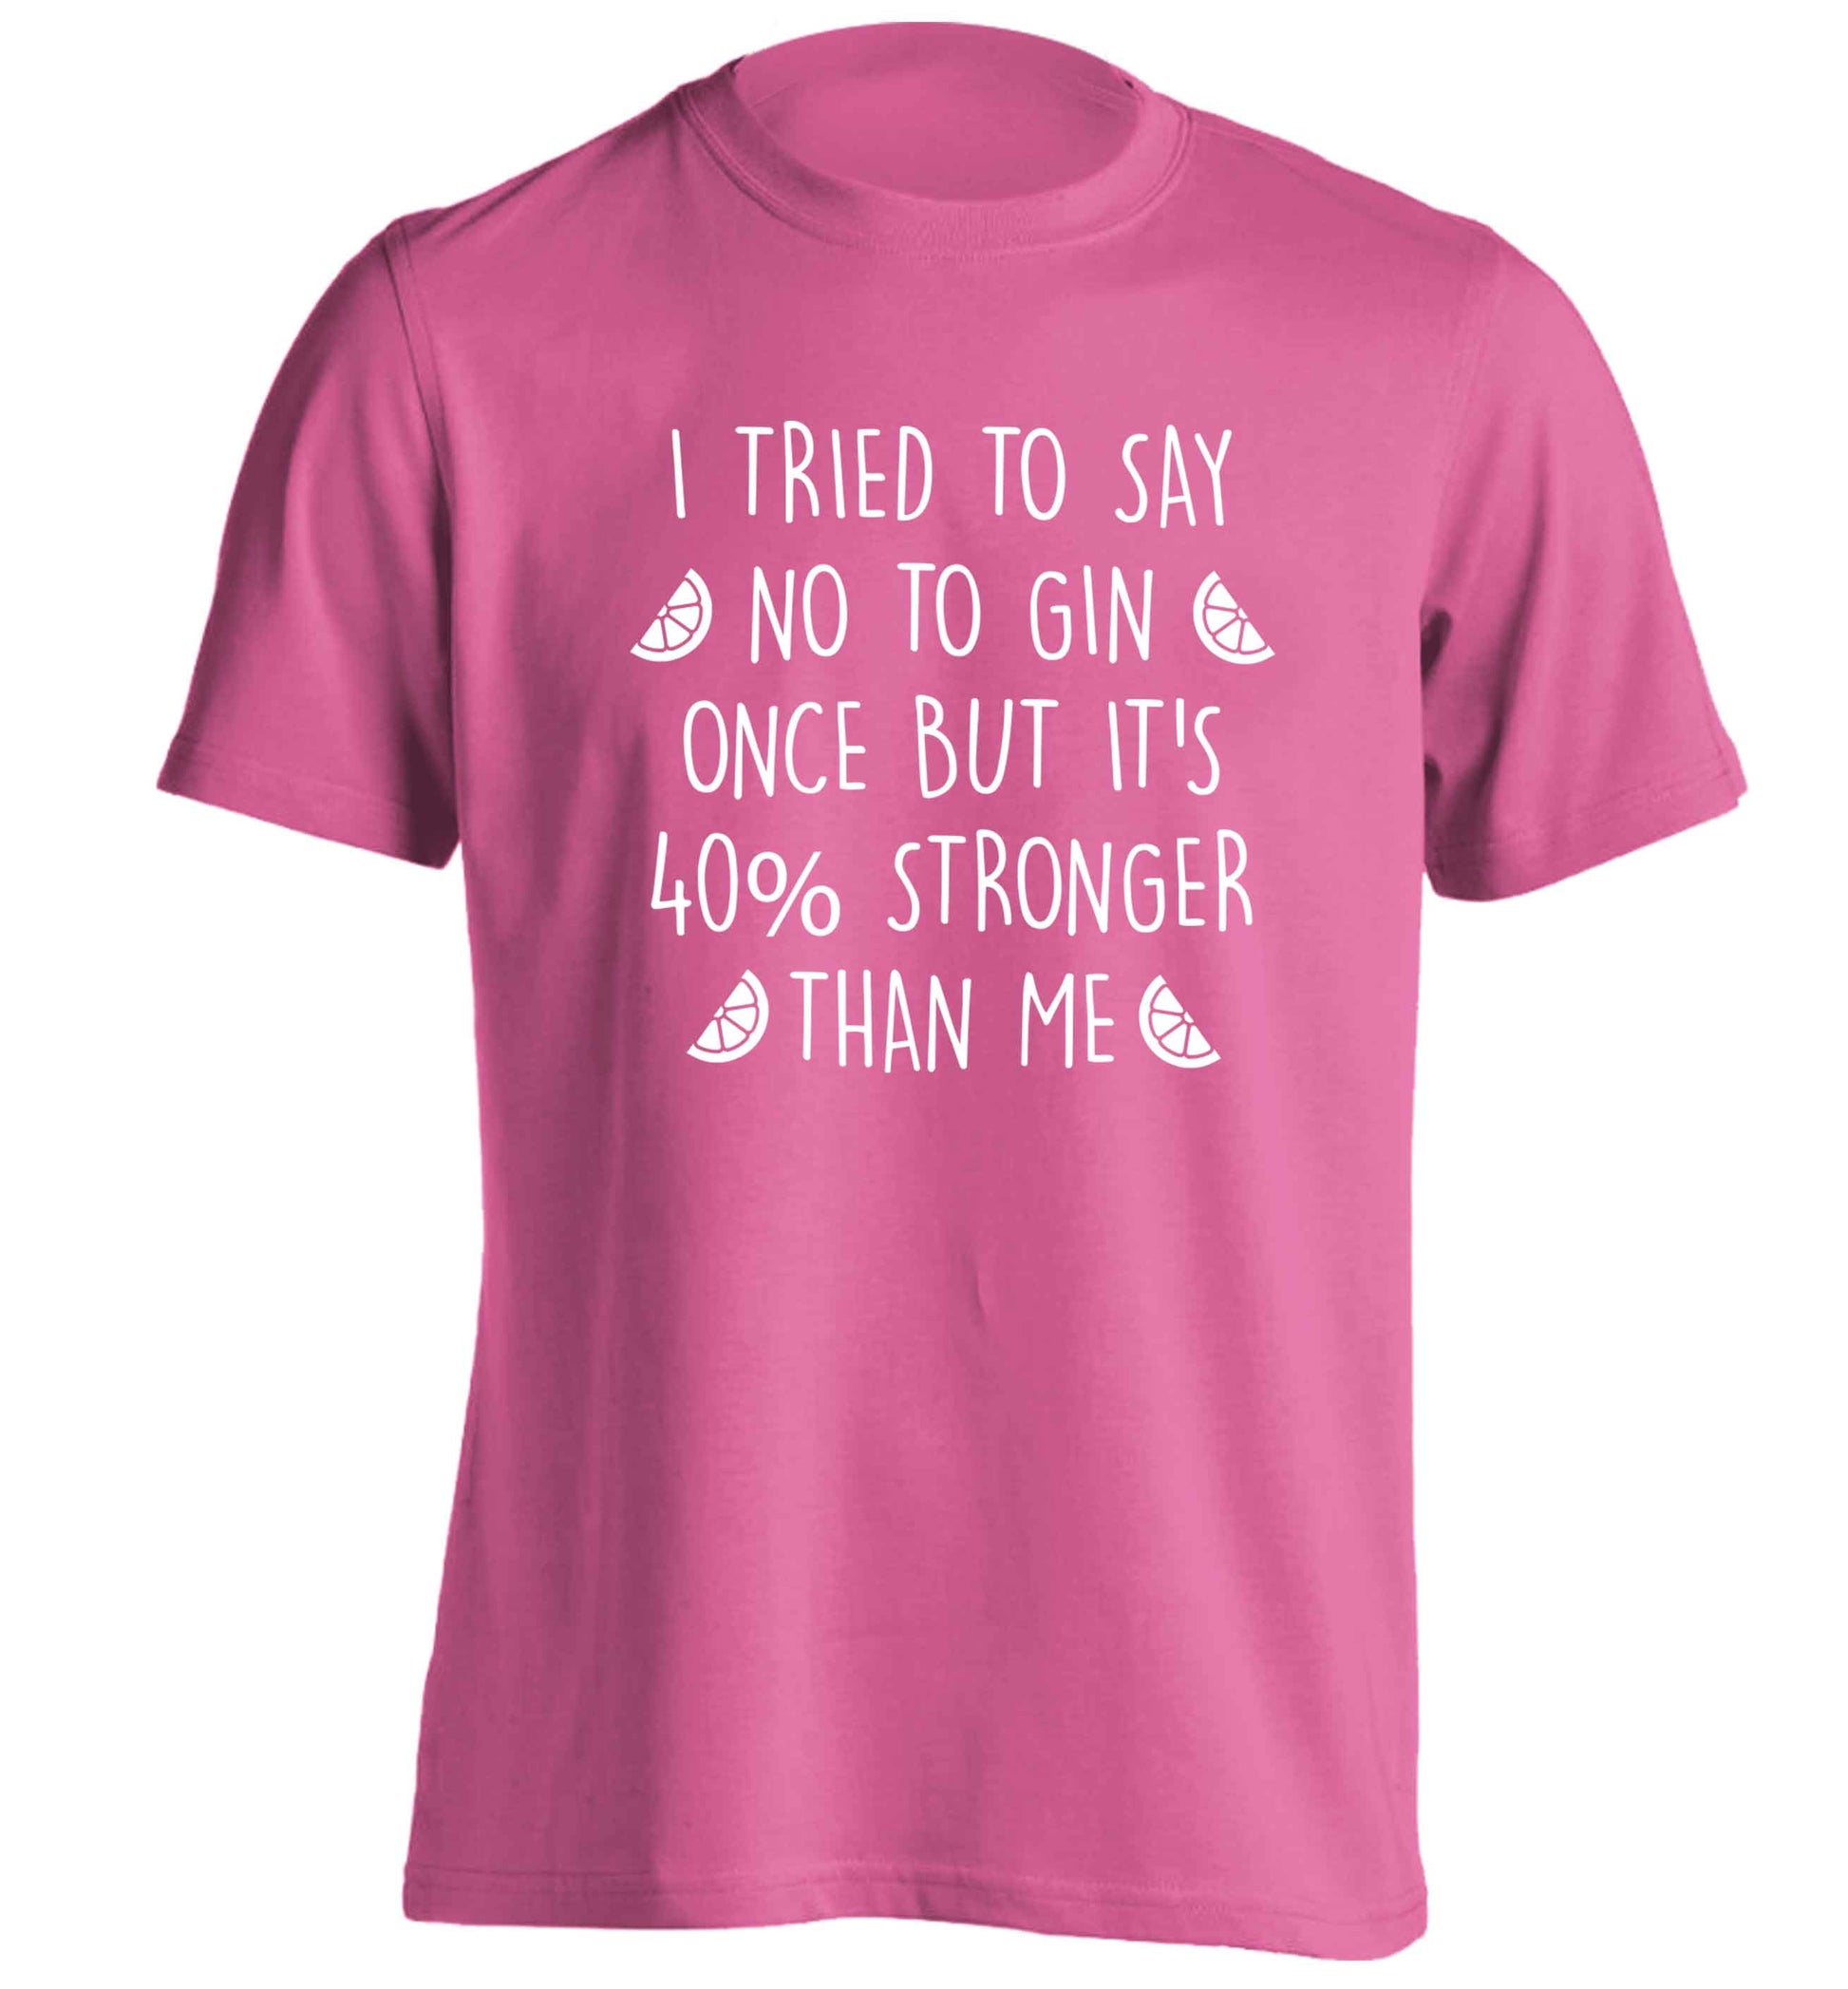 I tried to say no to gin once but it's 40% stronger than me adults unisex pink Tshirt 2XL